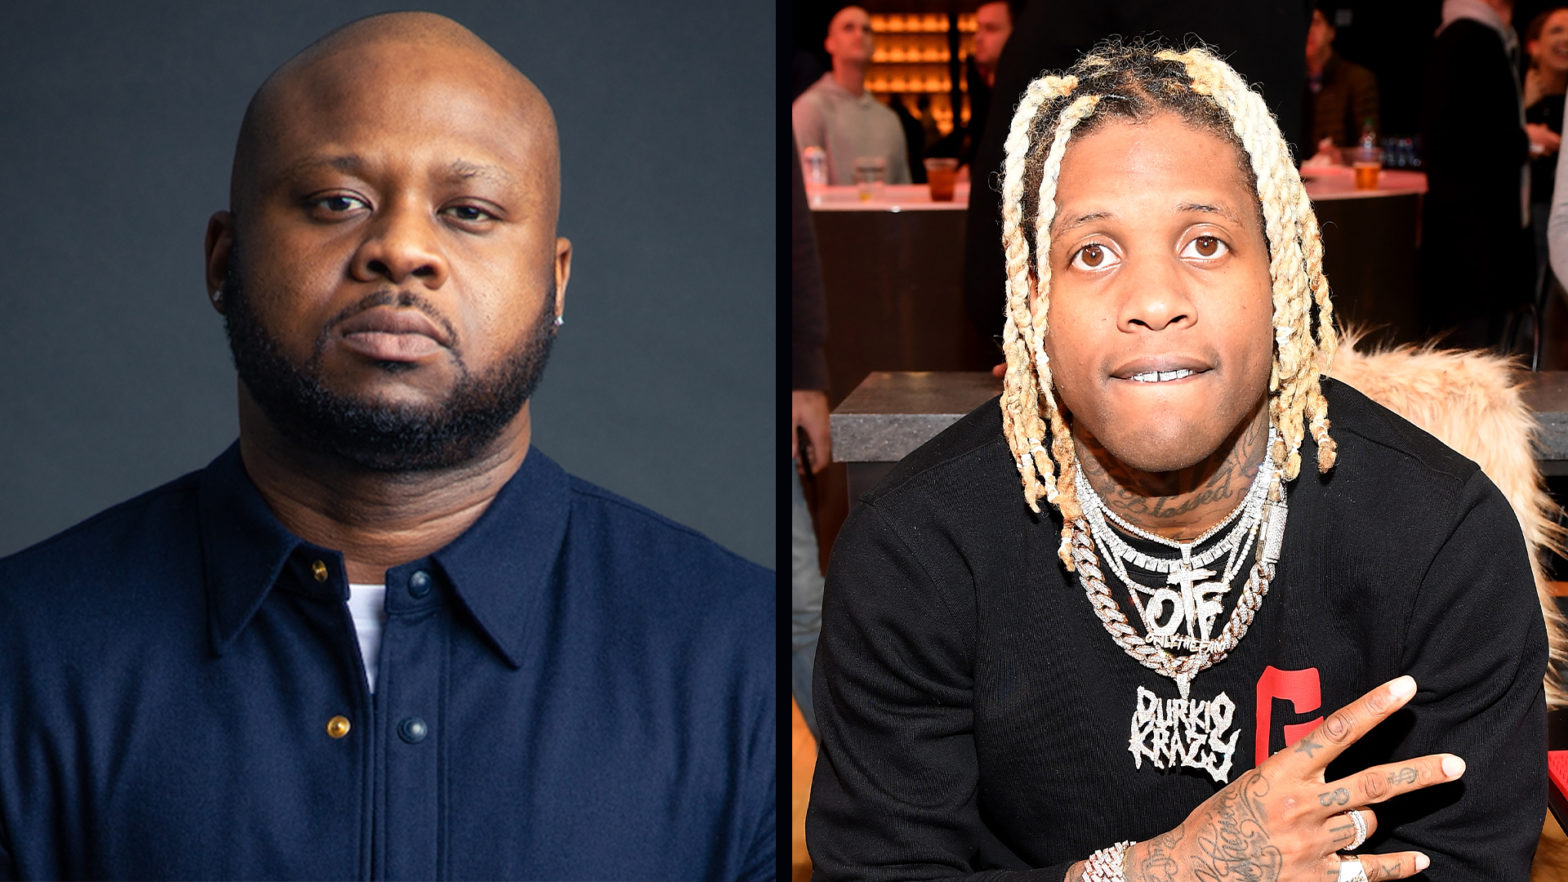 OTF Manager Ola Ali Is Helping Artists Like Lil Durk Bridge The Gap Between Hip-Hop And Gaming